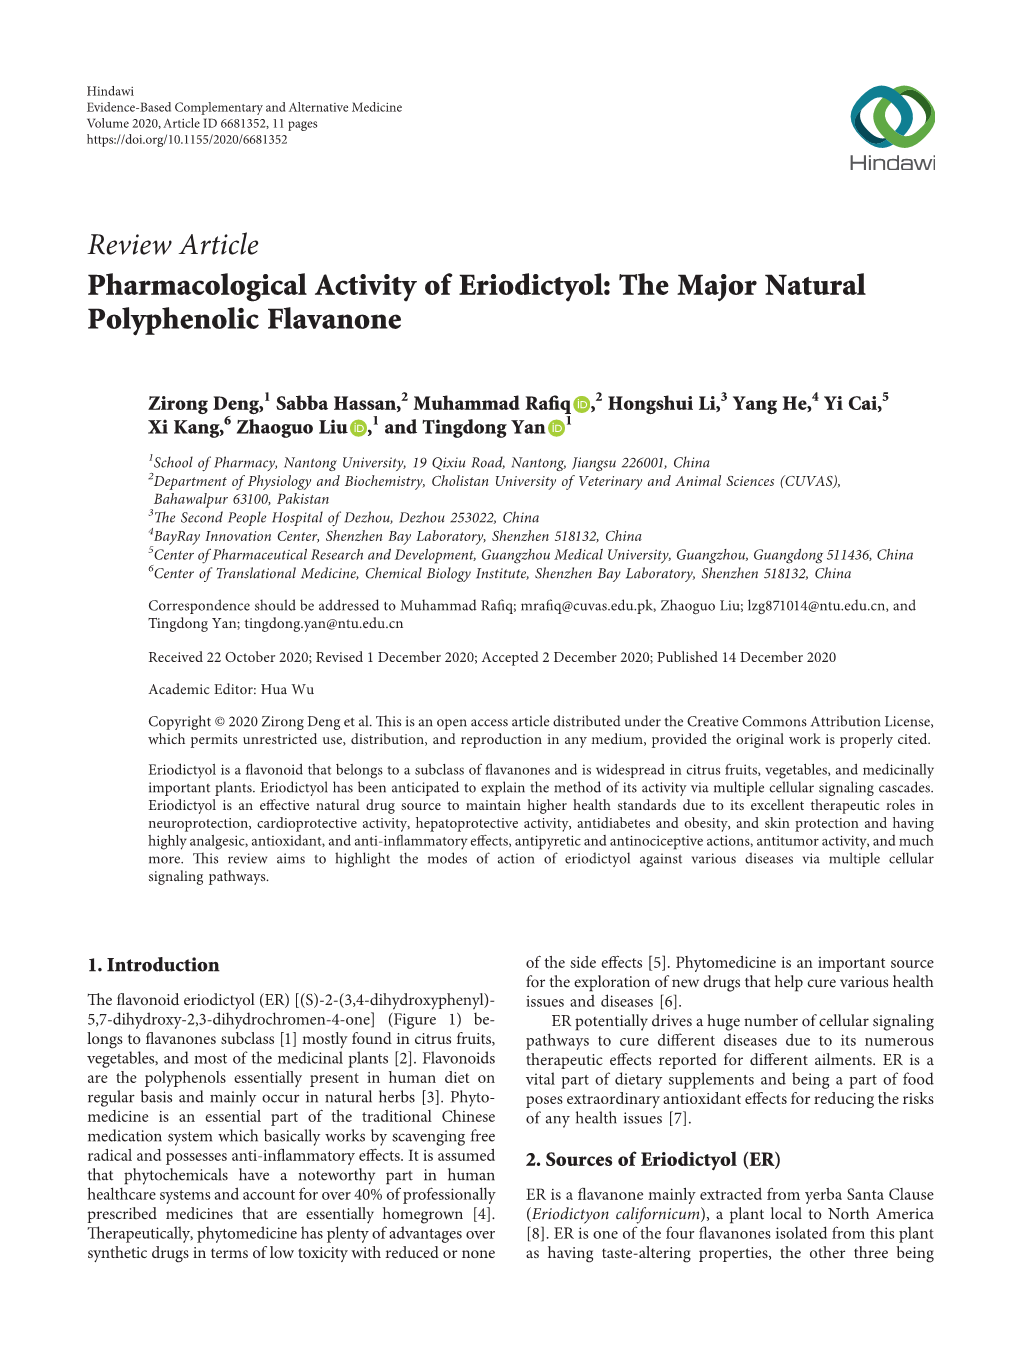 Pharmacological Activity of Eriodictyol: the Major Natural Polyphenolic Flavanone